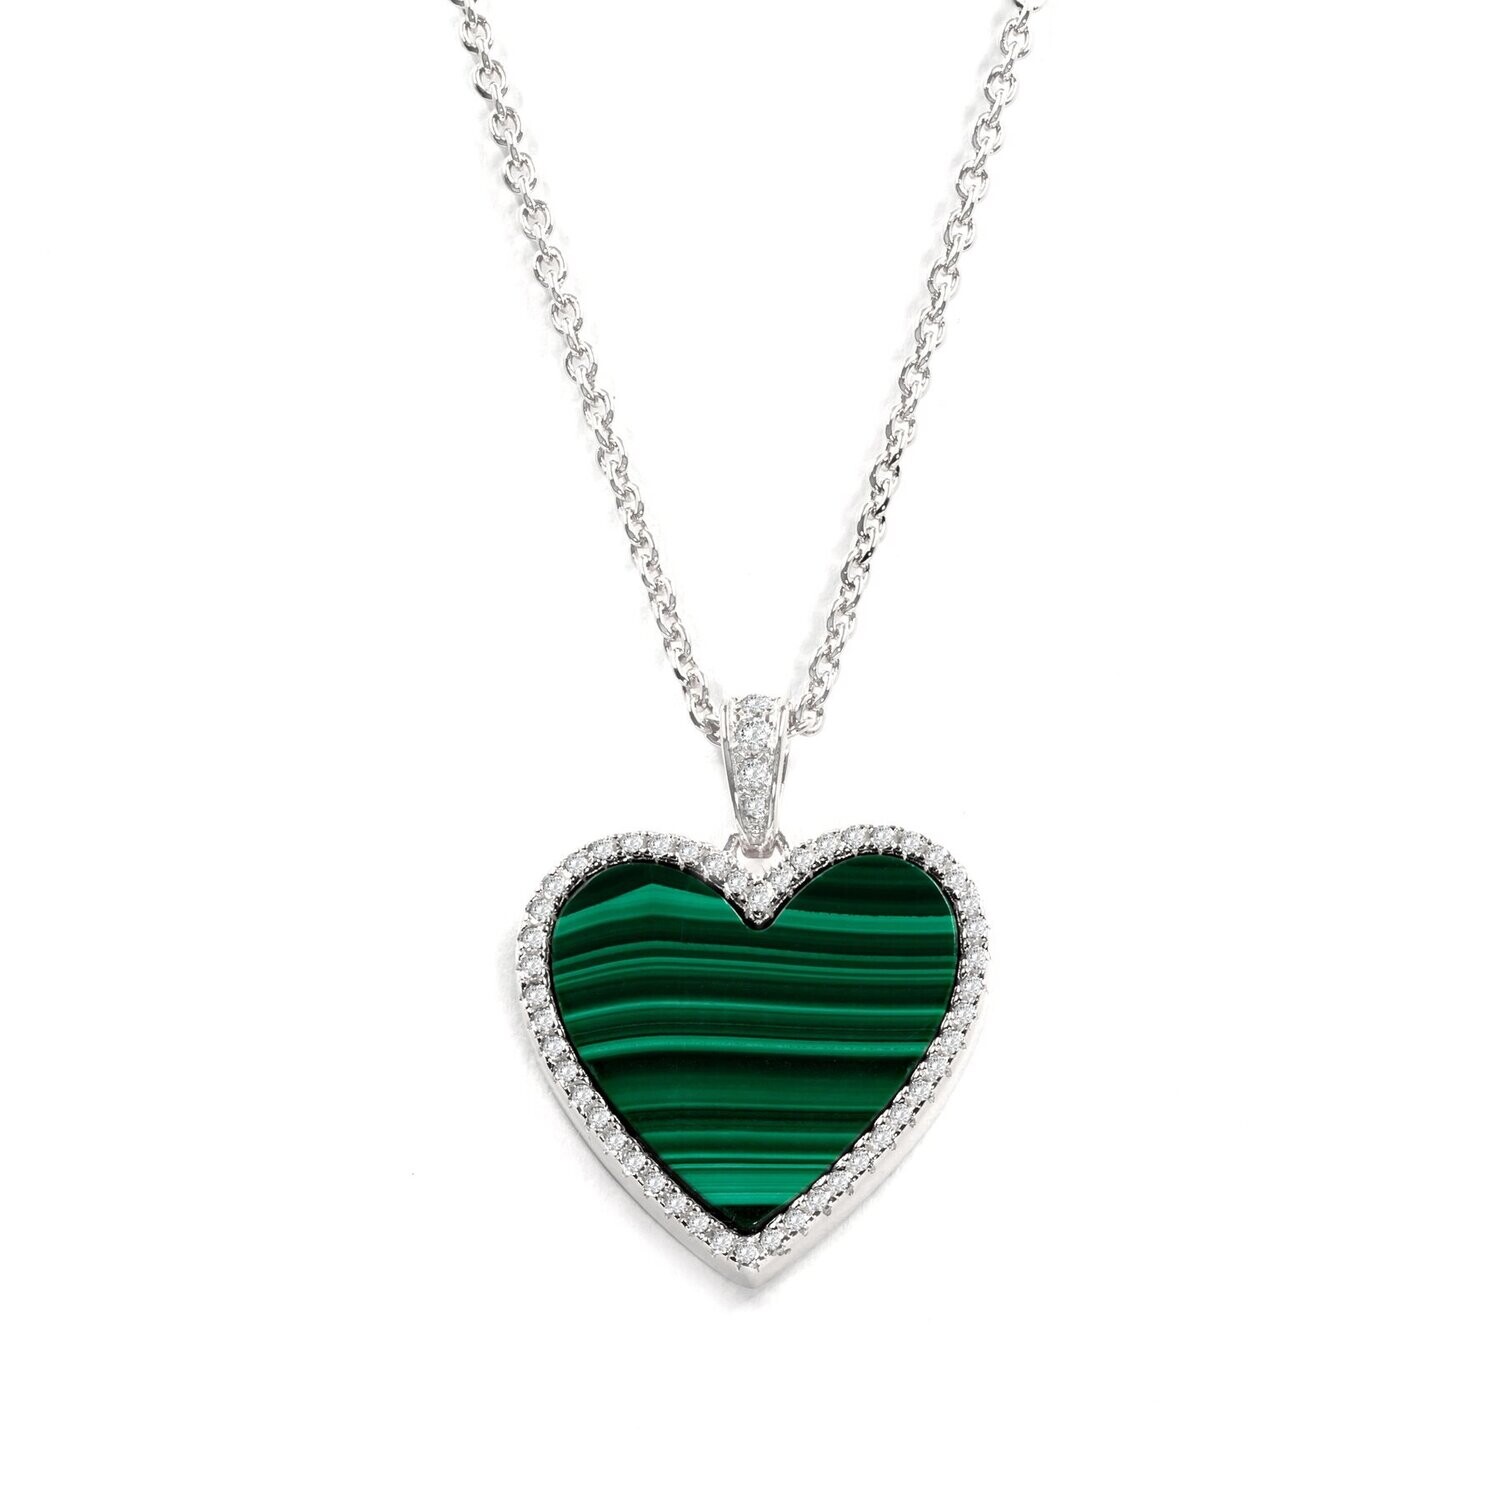 House of Cards Necklace in Malachite